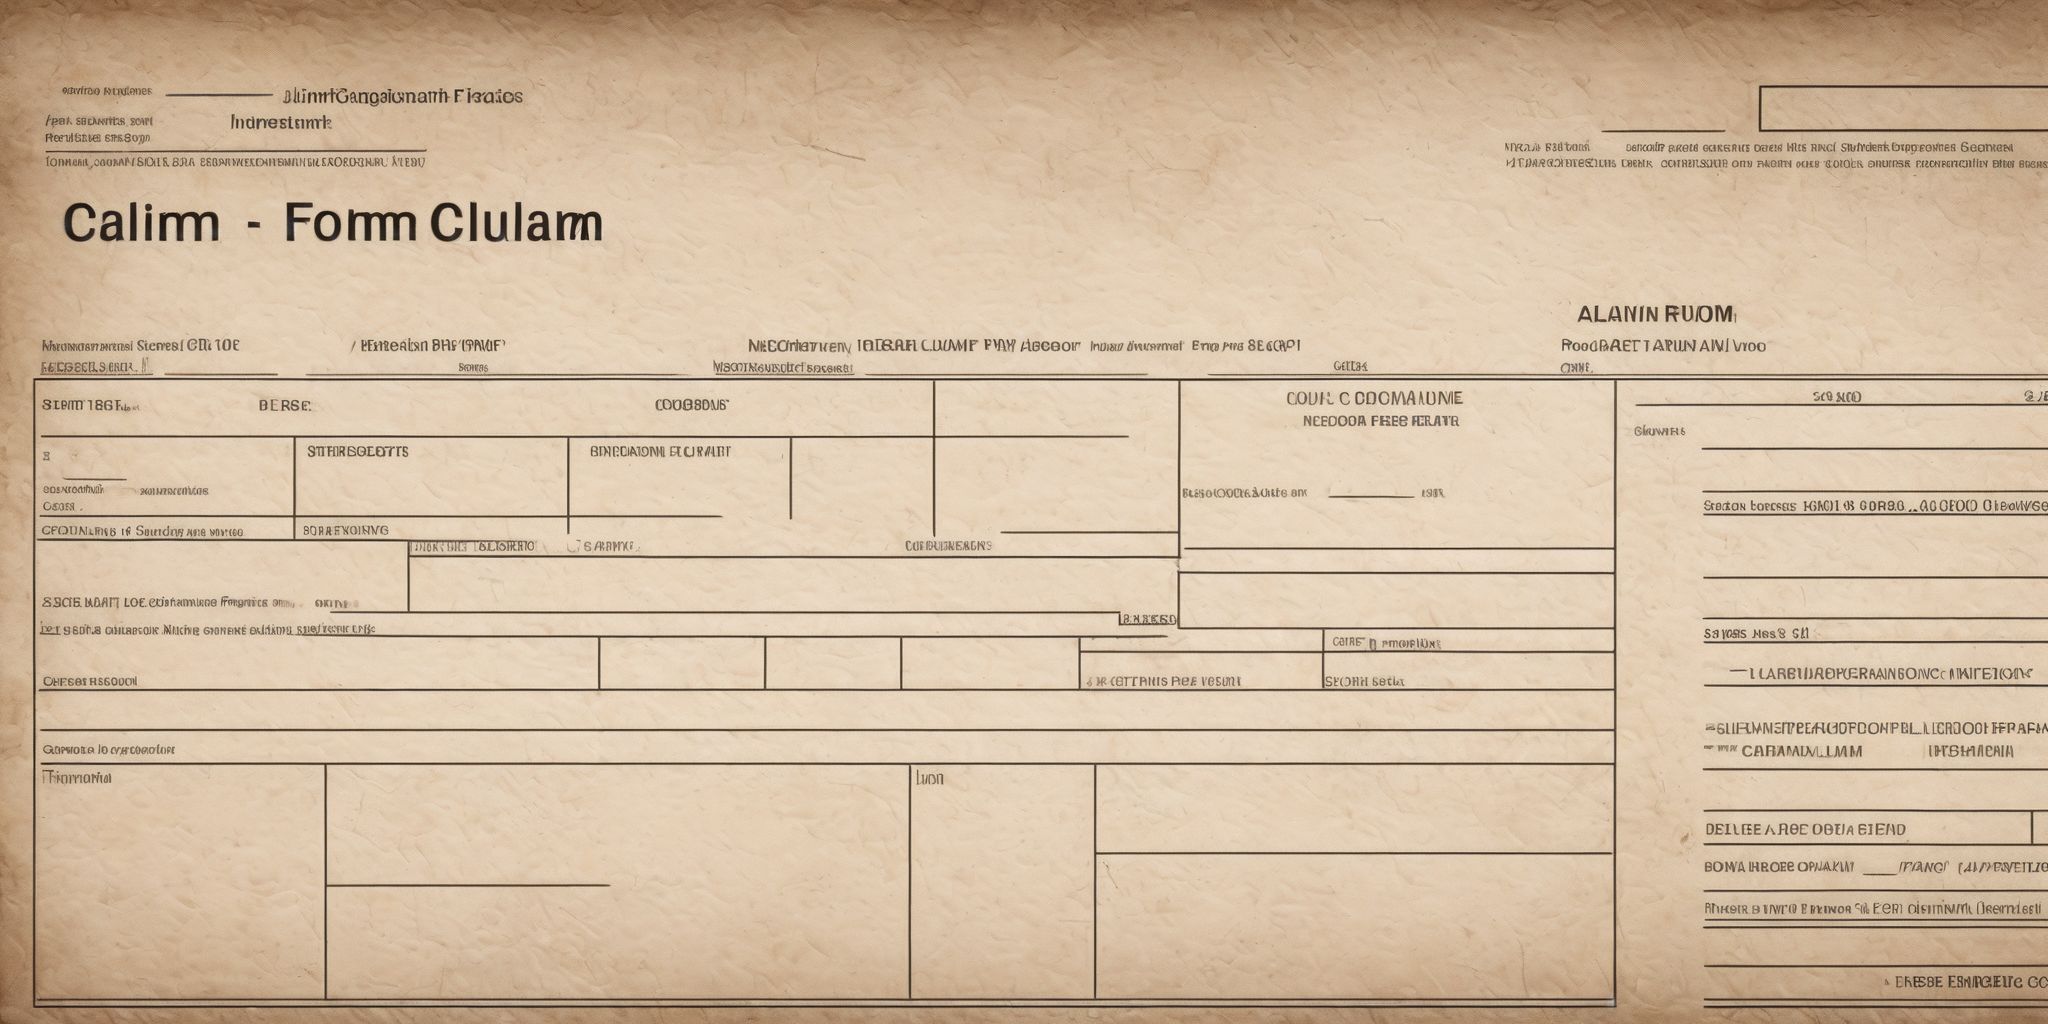 Claim form  in realistic, photographic style